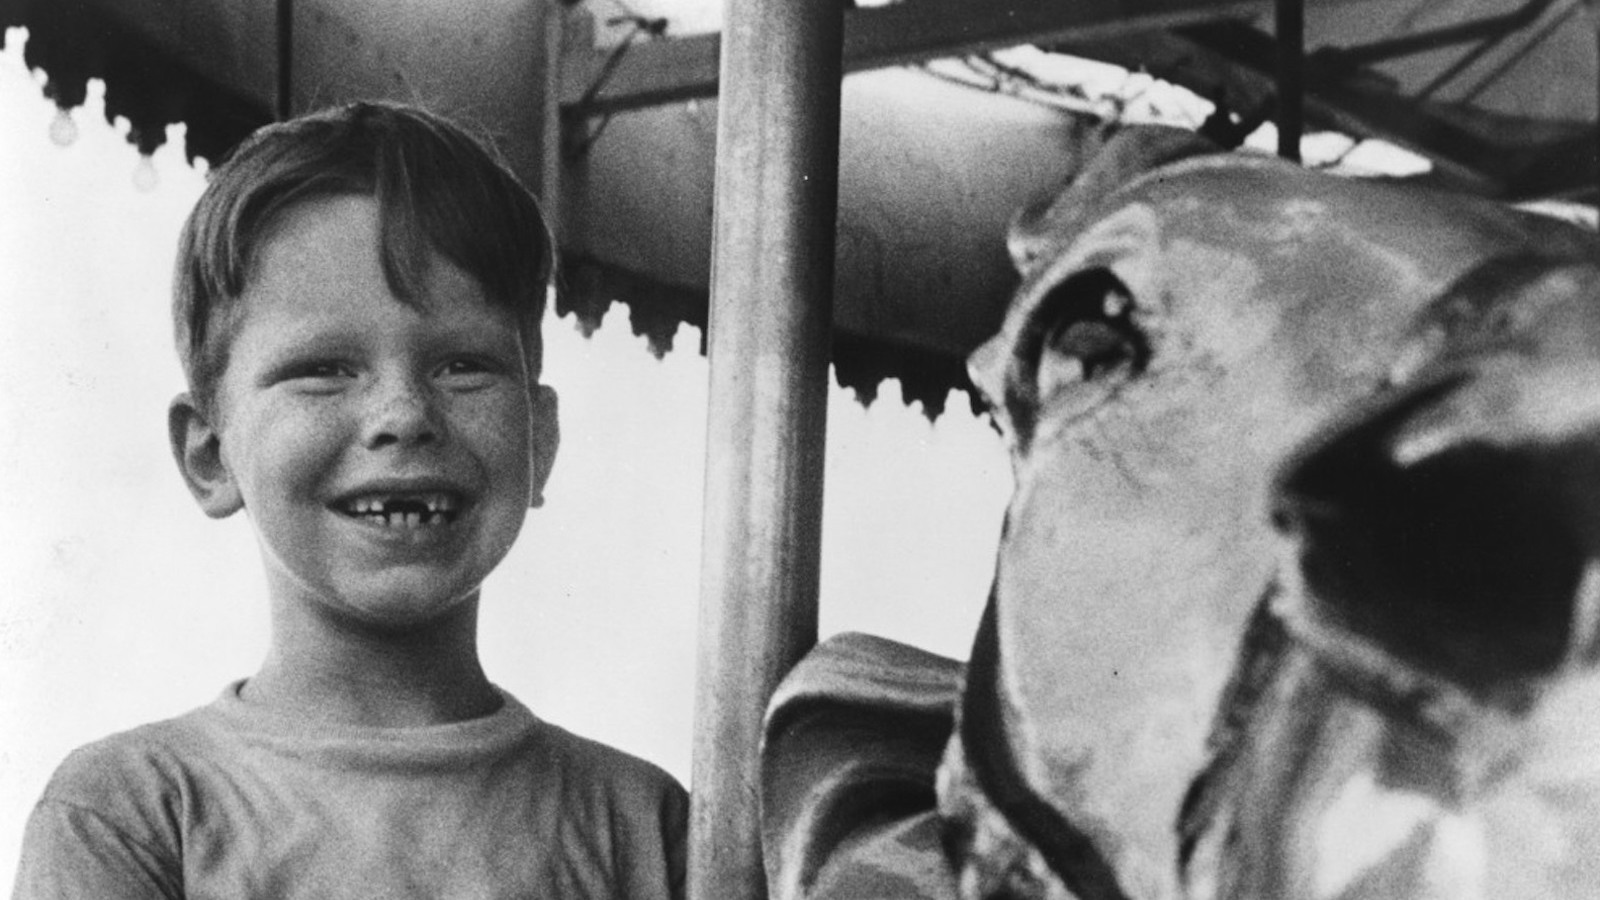 A young boy smiles while sitting on a carousel.